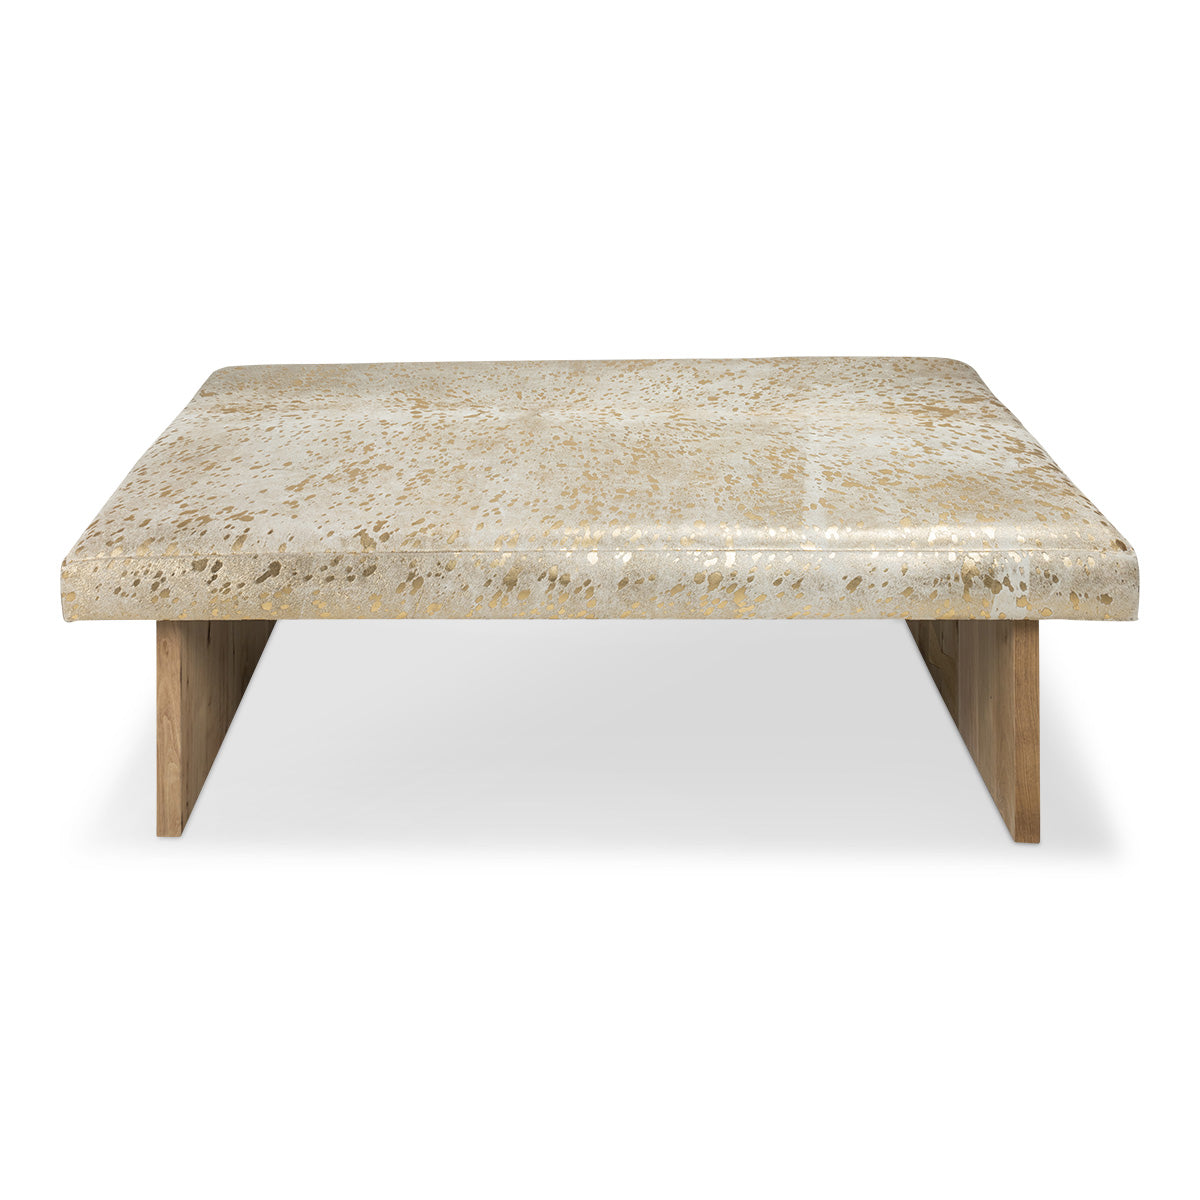 Bonanza Bench in Gold Speckled Foil with Natural Cowhide